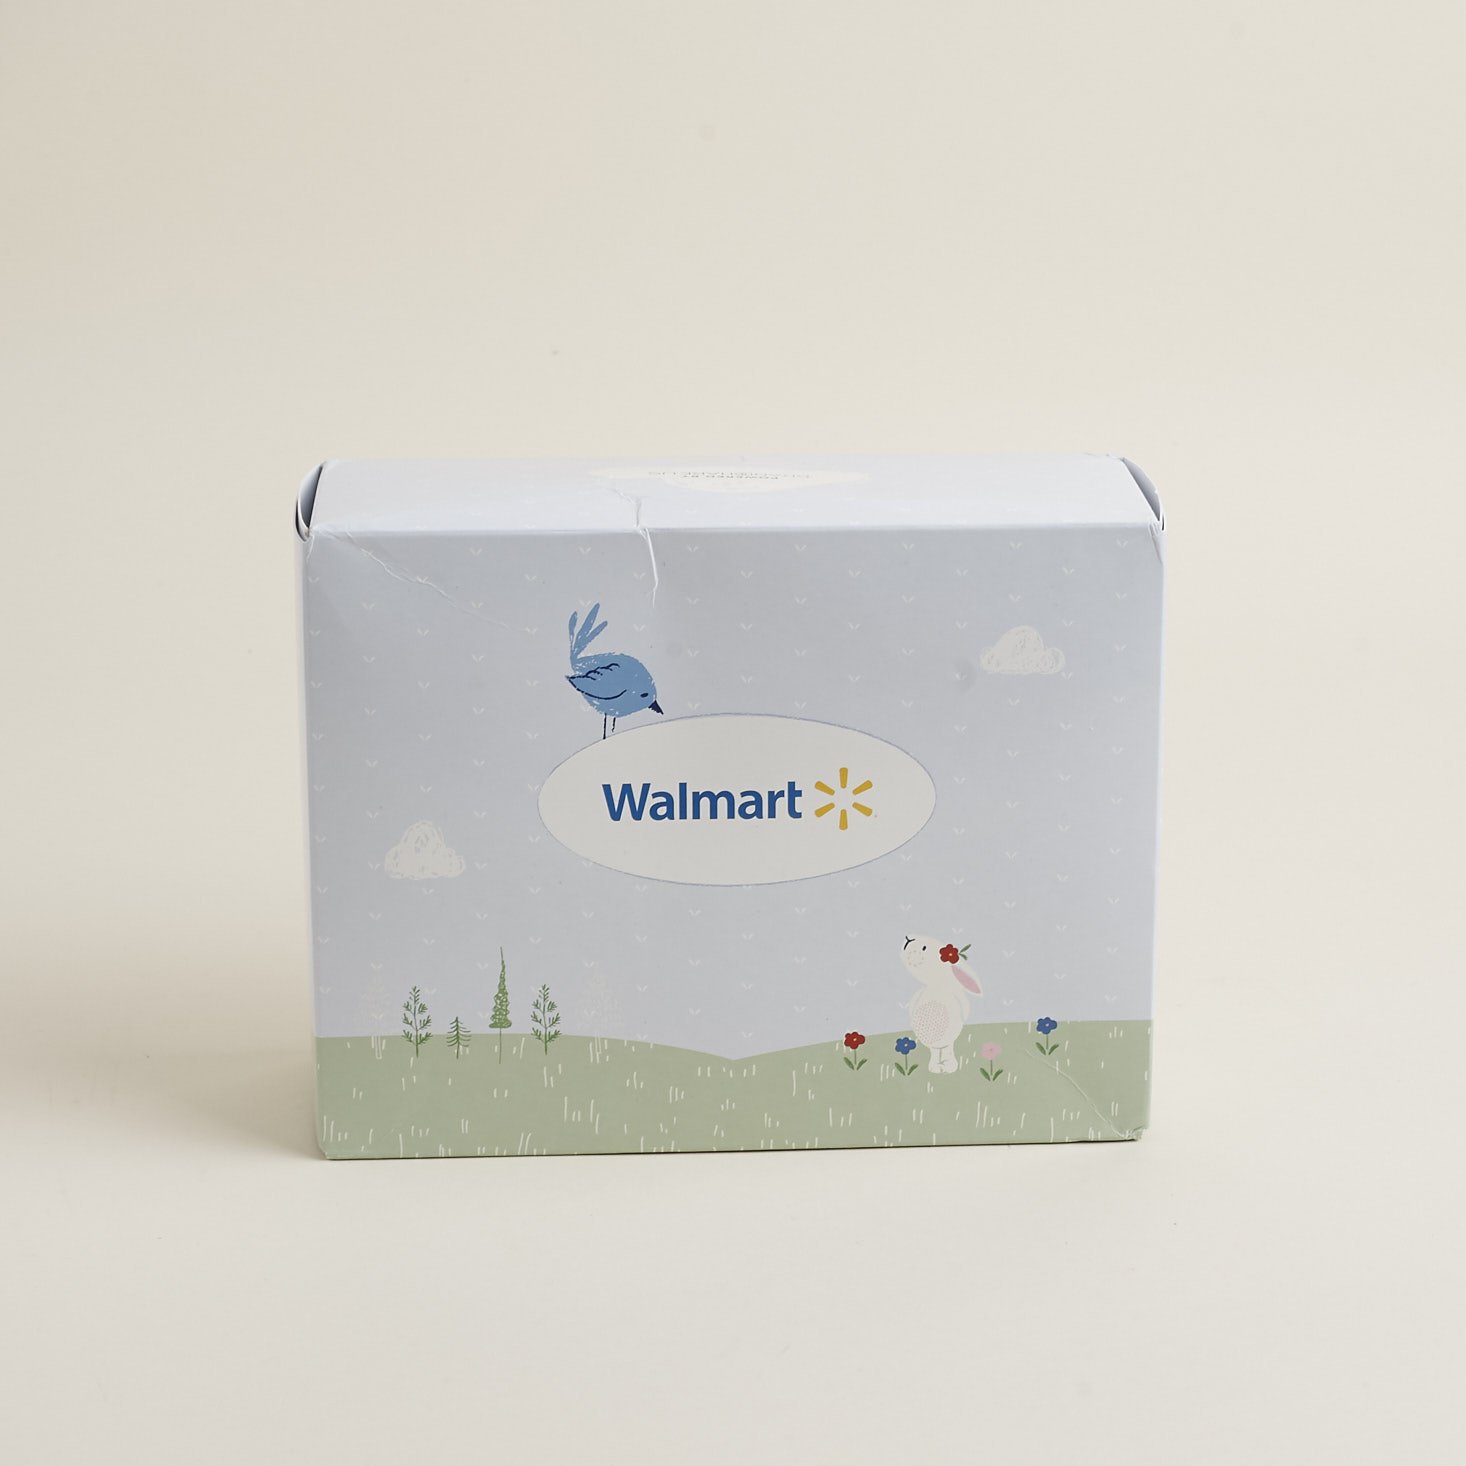 Walmart Baby Box Toddler Review – March 2018